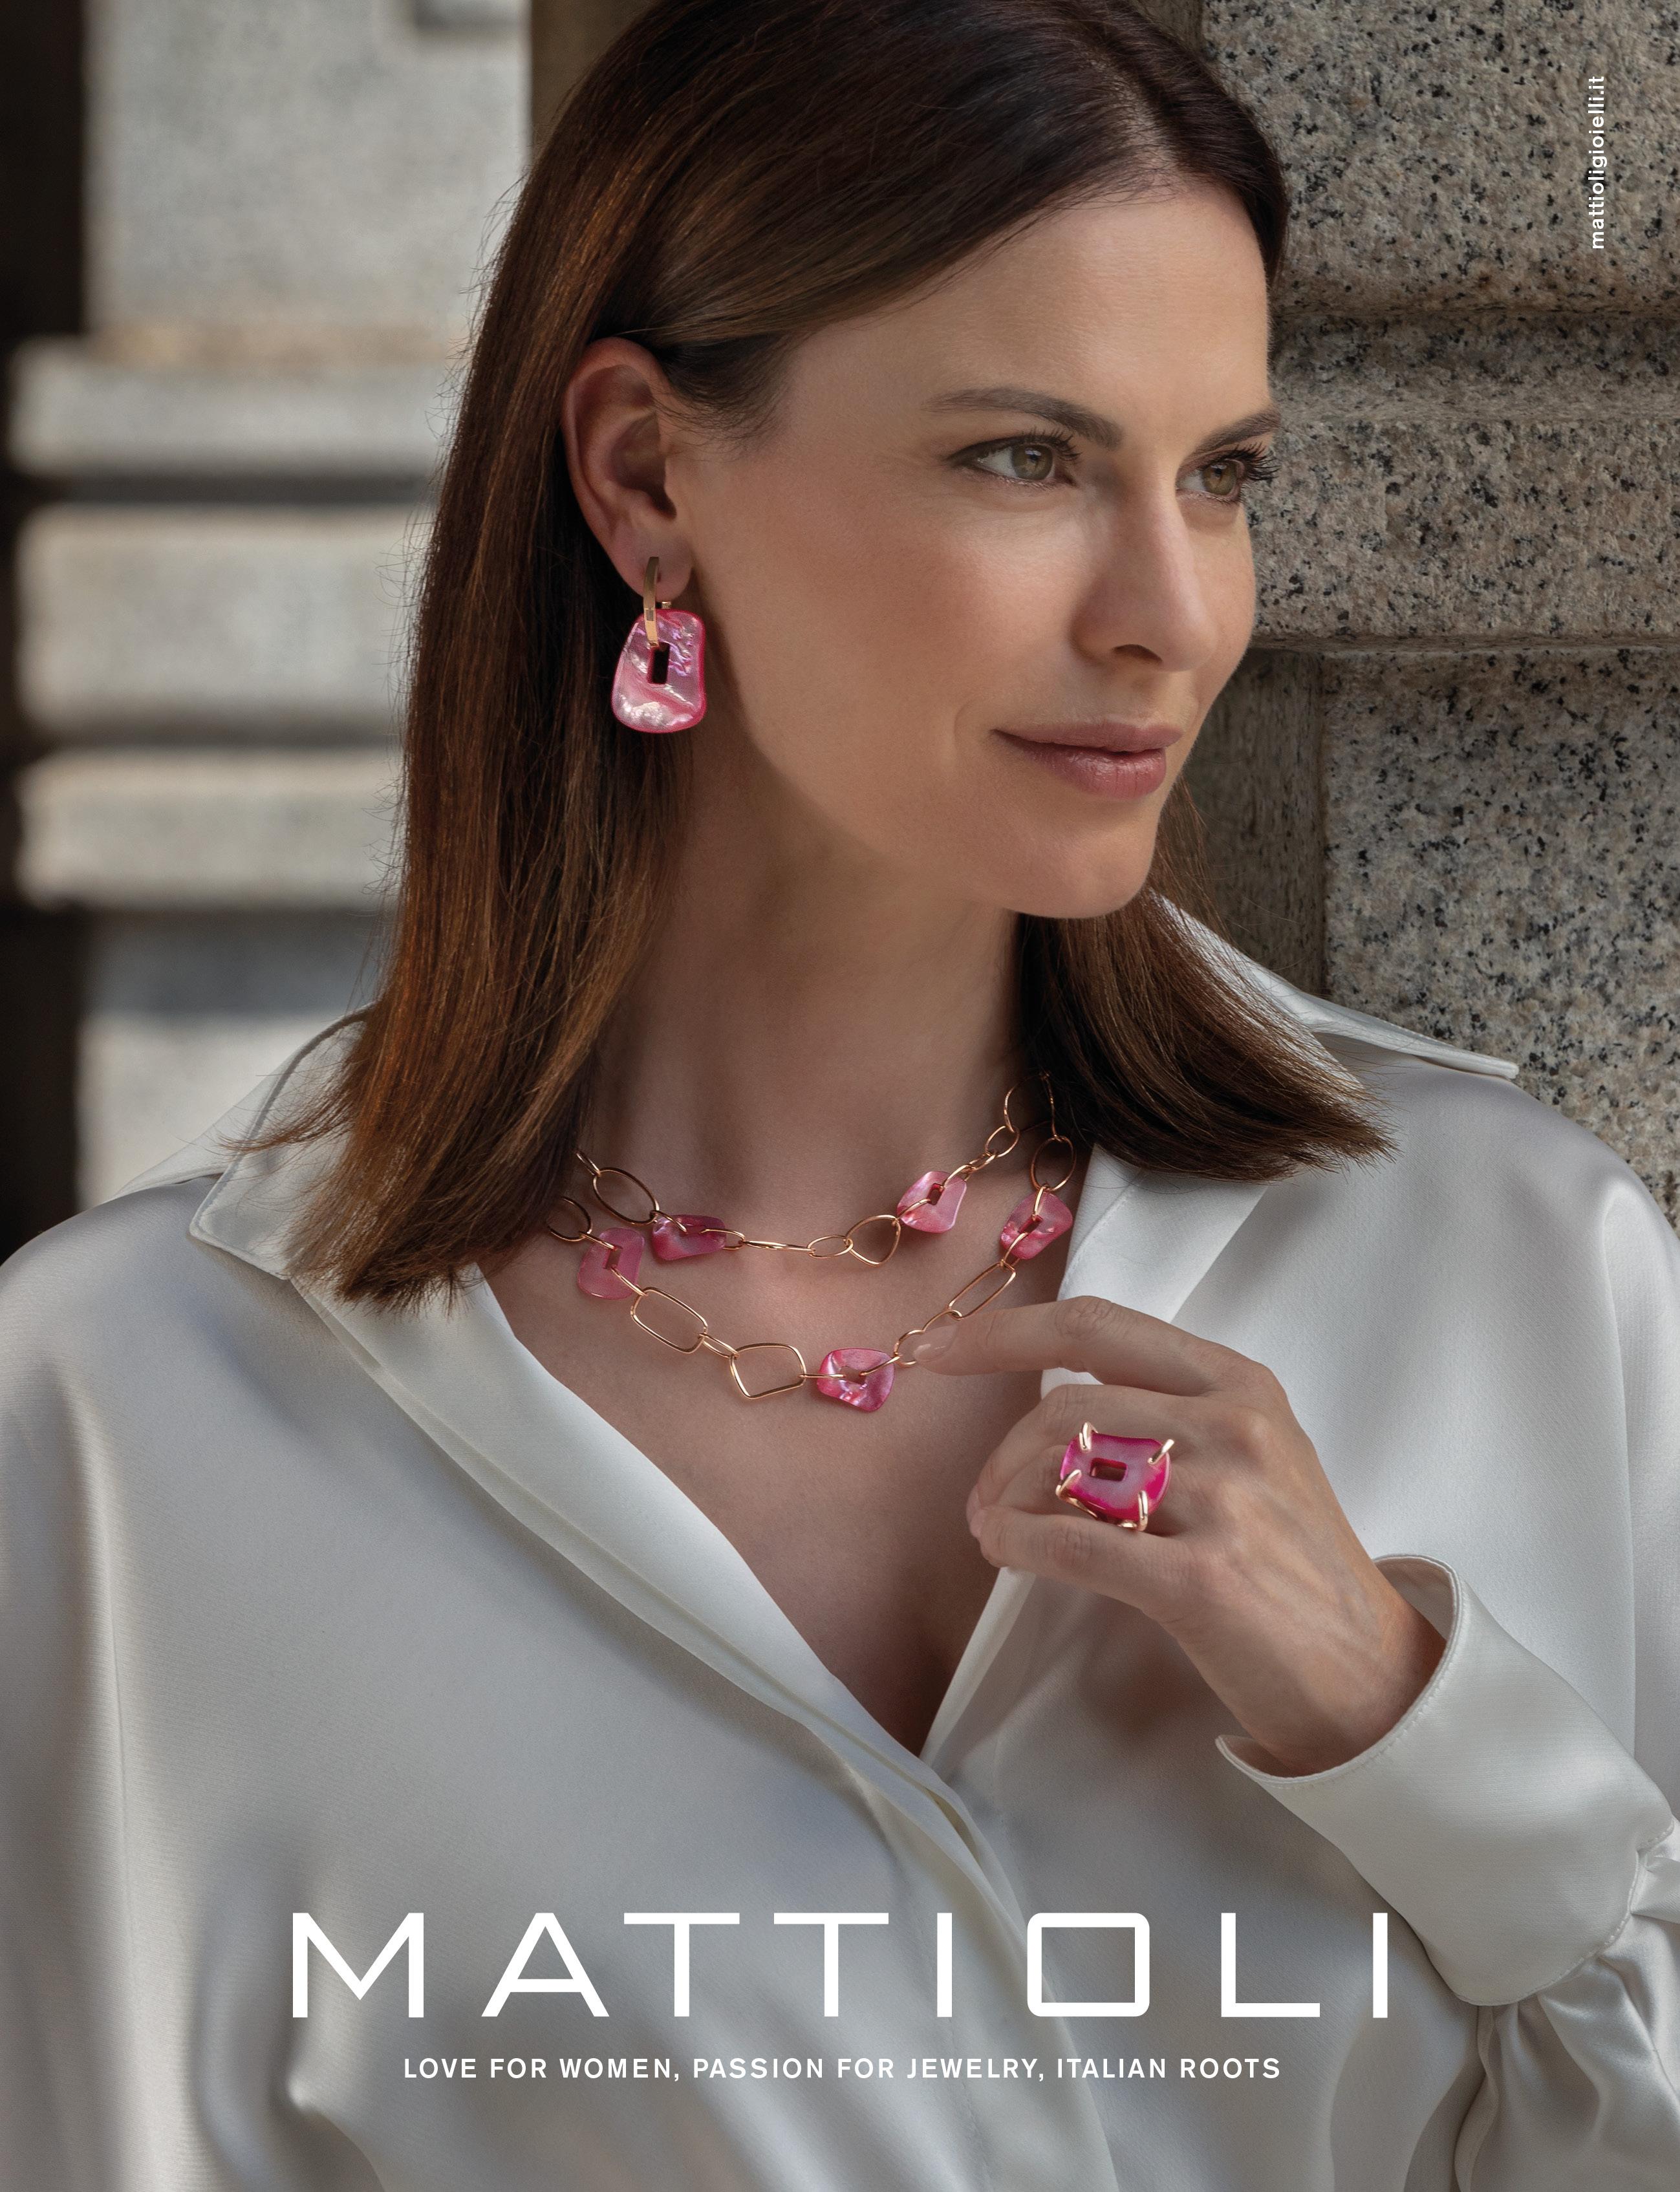 Mattioli Puzzle Collection 18 Karat Rose Gold Necklace
optional coloured puzzles

Gold Weight 45,00gr  
Important information for this ORDER !
Request availability if in stock inmediate shipping
If need production time is 4-5 weeks 

READY TO